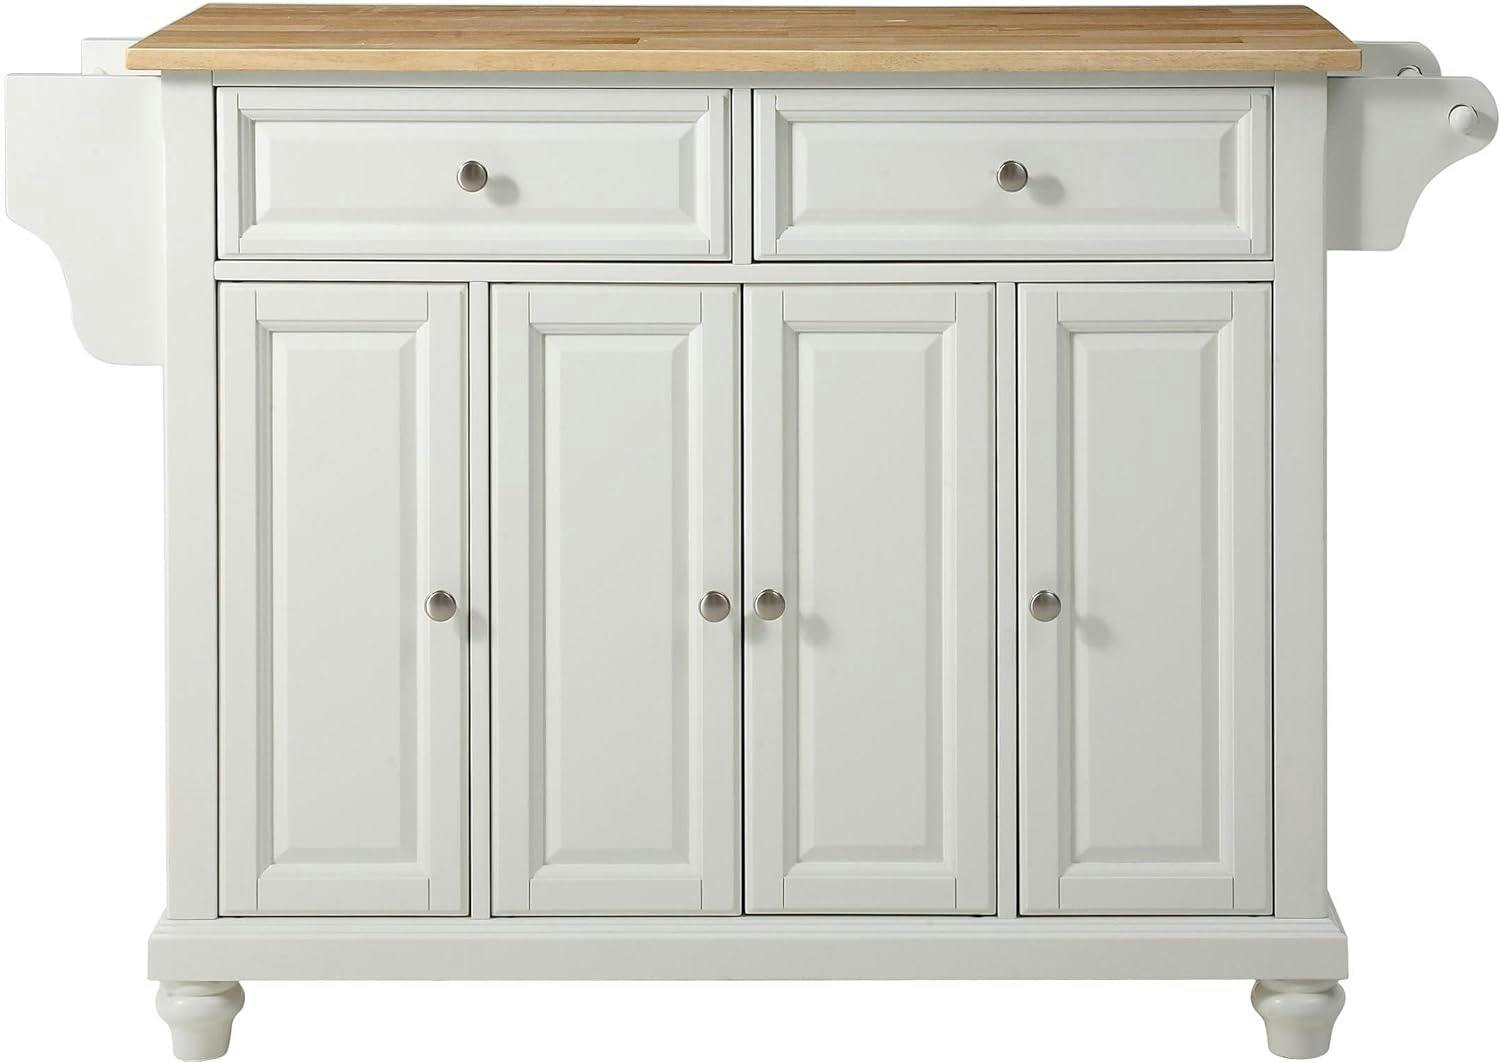 Cambridge Classic White and Natural Wood Full-Size Kitchen Island